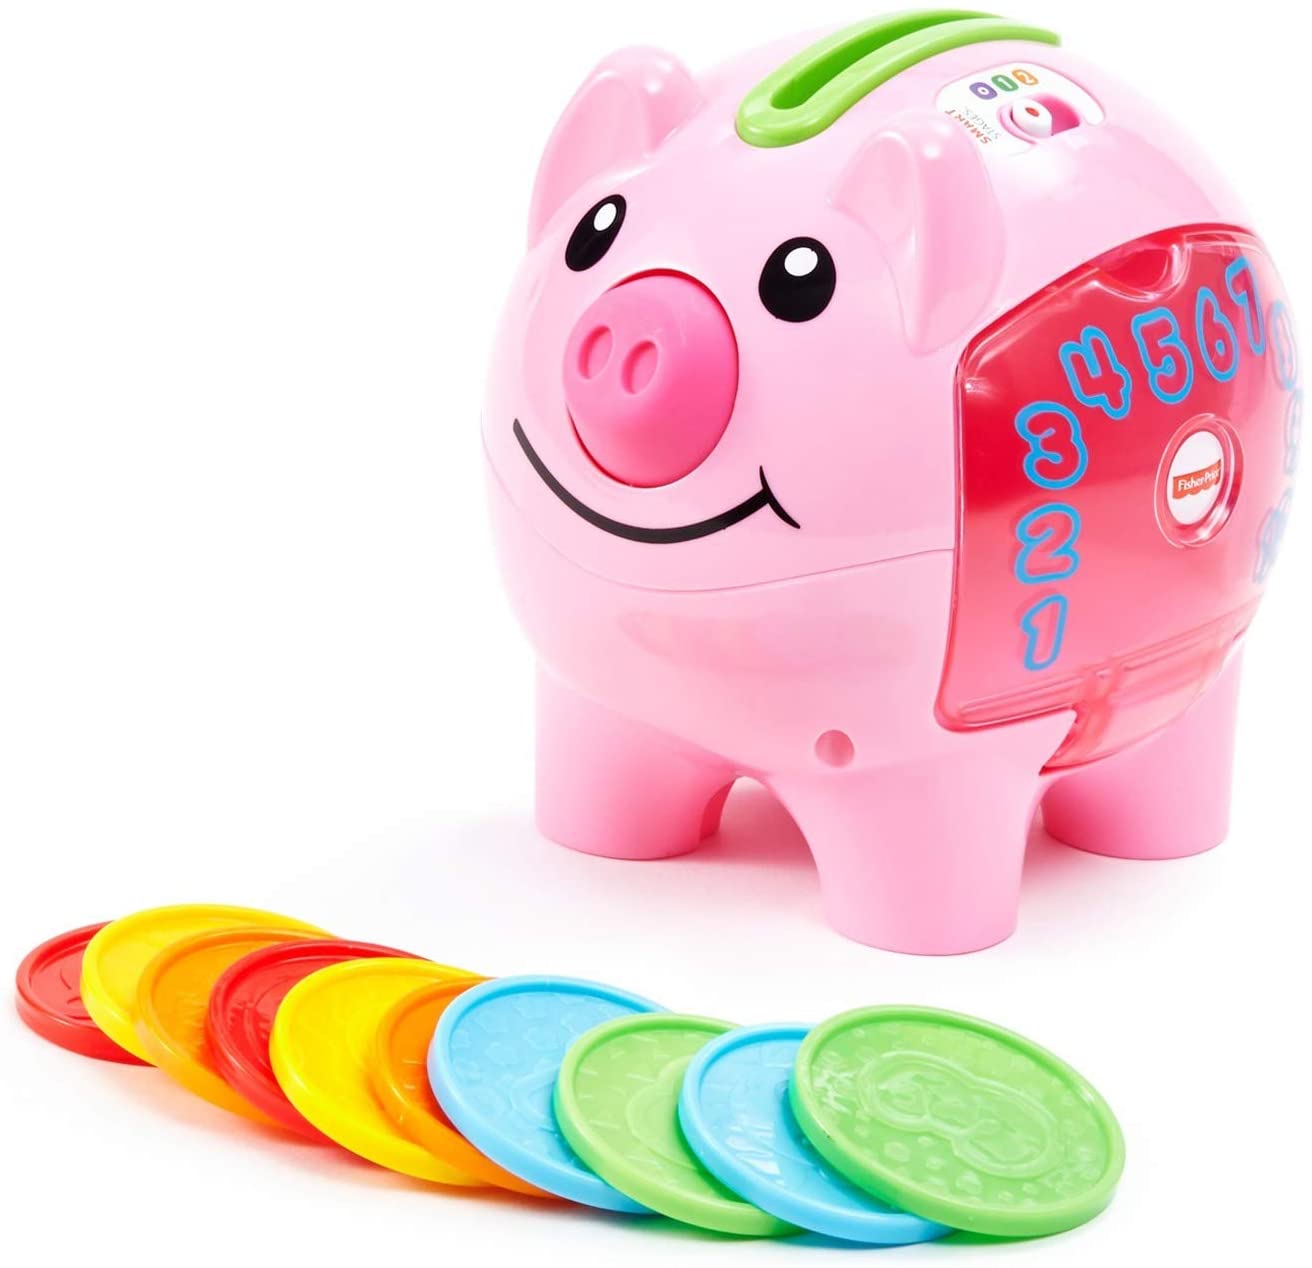 Fisher-Price Laugh & Learn Smart Stages Piggy Bank - Sing-along songs, tunes & phrases